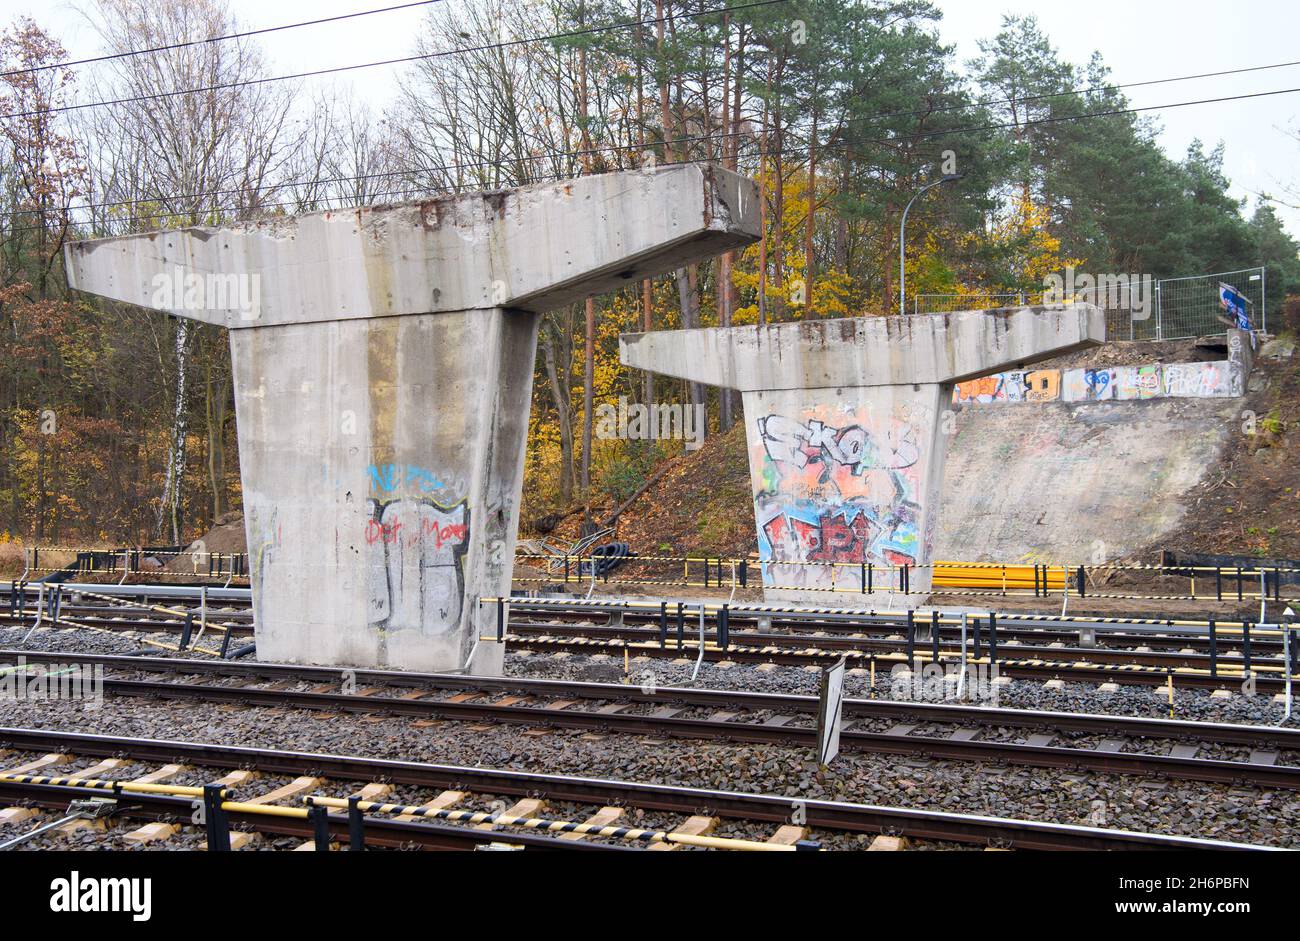 17 November 2021, Brandenburg, Hohen Neuendorf: Only the supporting pillars of the former bridge of the L 171 state road over the railway tracks are still standing. The bridge between Hohen Neuendorf and Bergfelde, built in the 1960s, had to be demolished because damage to the prefabricated prestressed concrete girders was discovered during a special inspection. According to the Landesbetriebes Straßenwesen, it could not be ruled out that concrete parts would fall onto the tracks or passing trains. It is planned that a temporary bridge will be built in the spring of 2022 year. The individual s Stock Photo